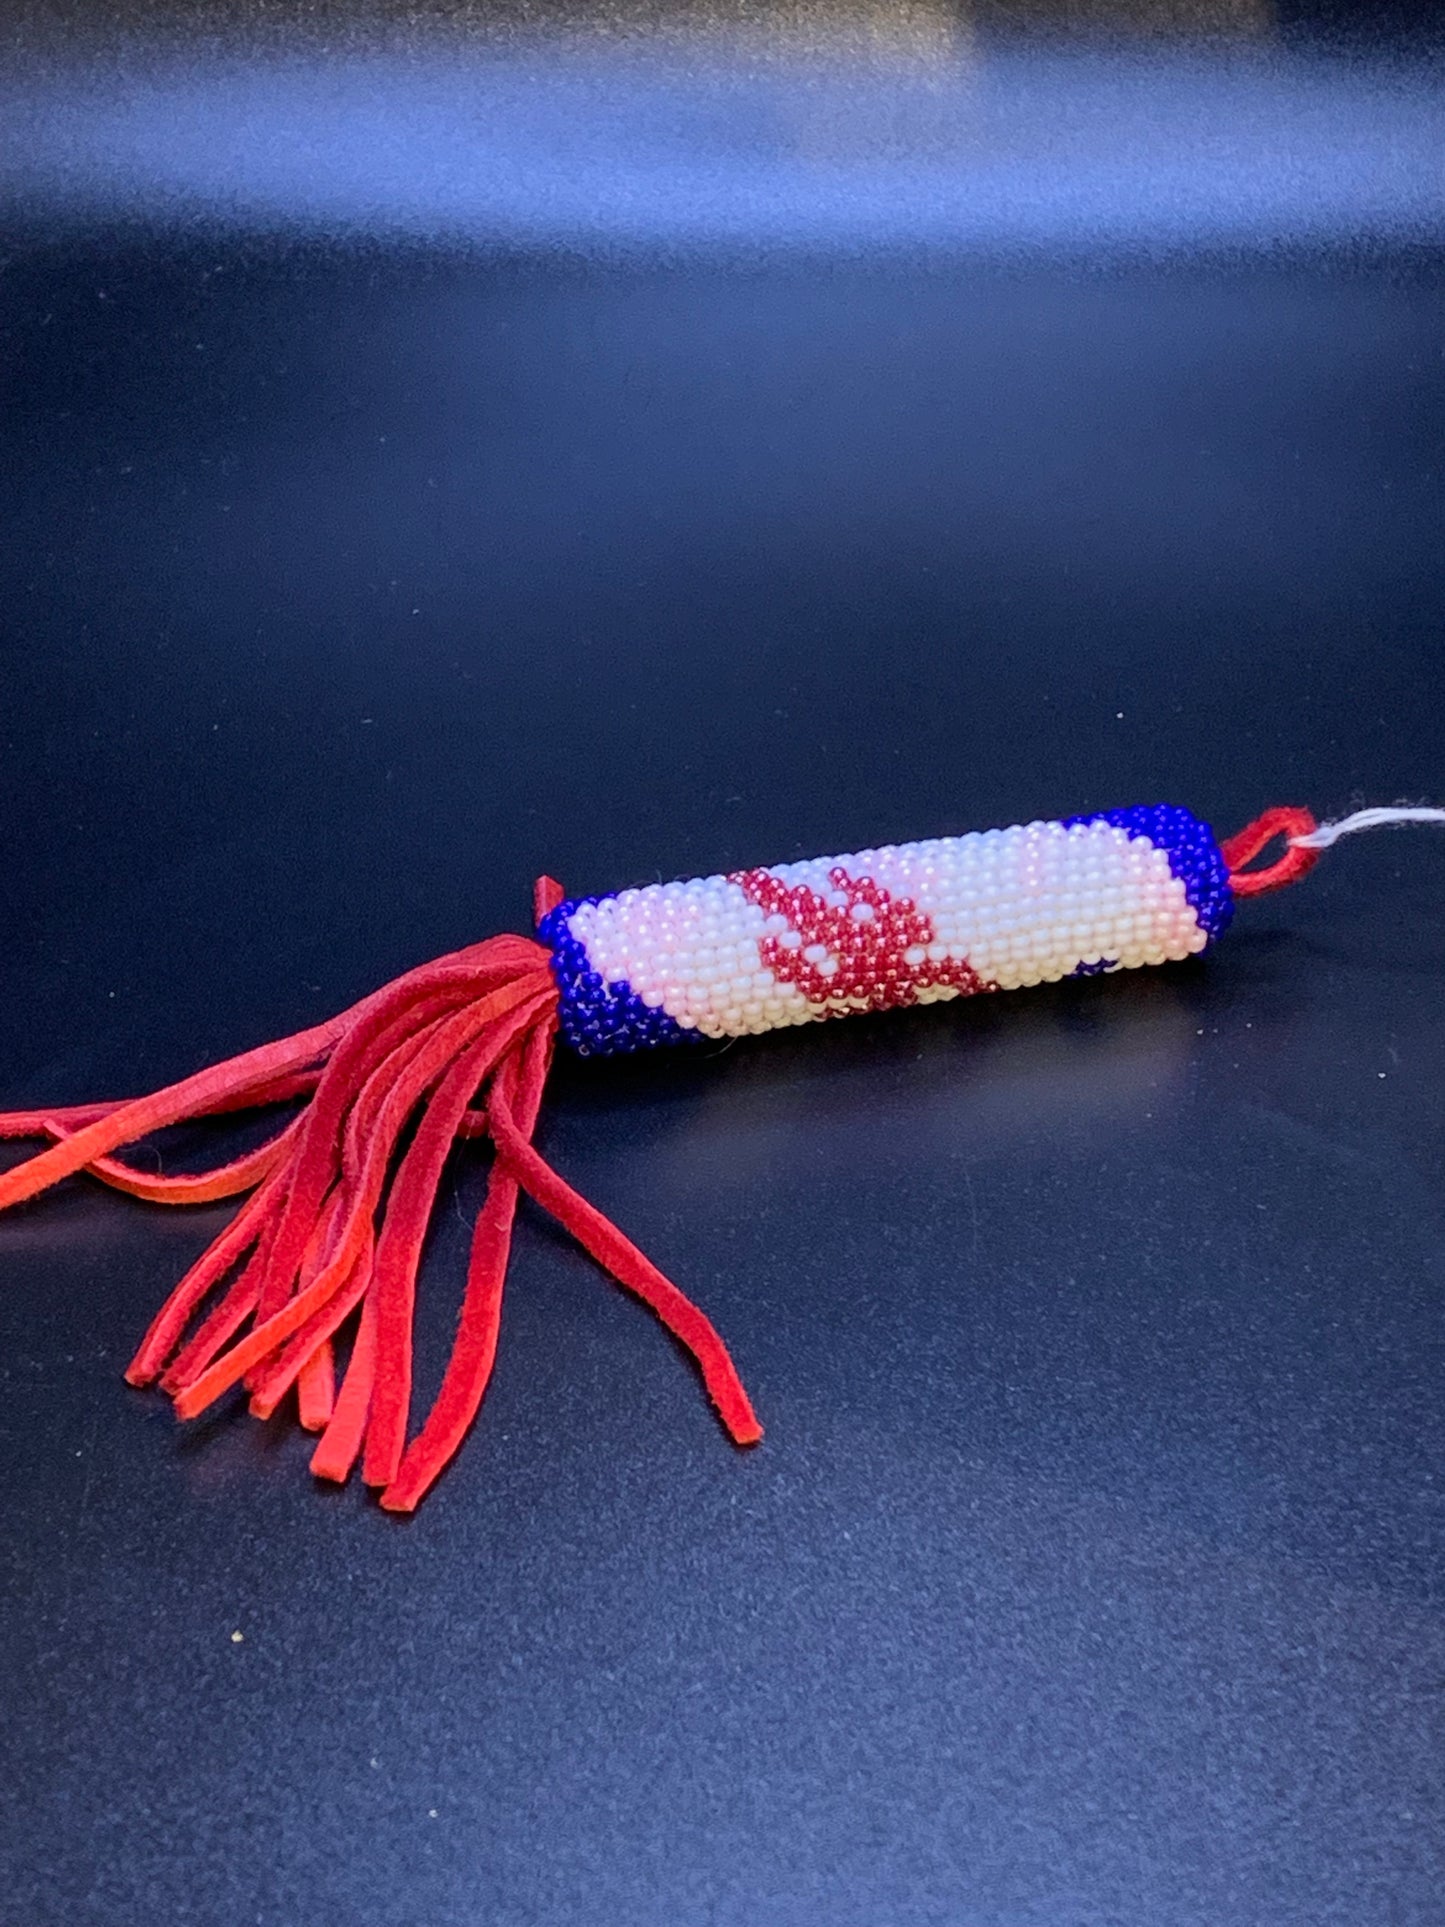 Robert Horse - Runner's Beaded Keychain - Intertribal Creatives by Running Strong for American Indian Youth